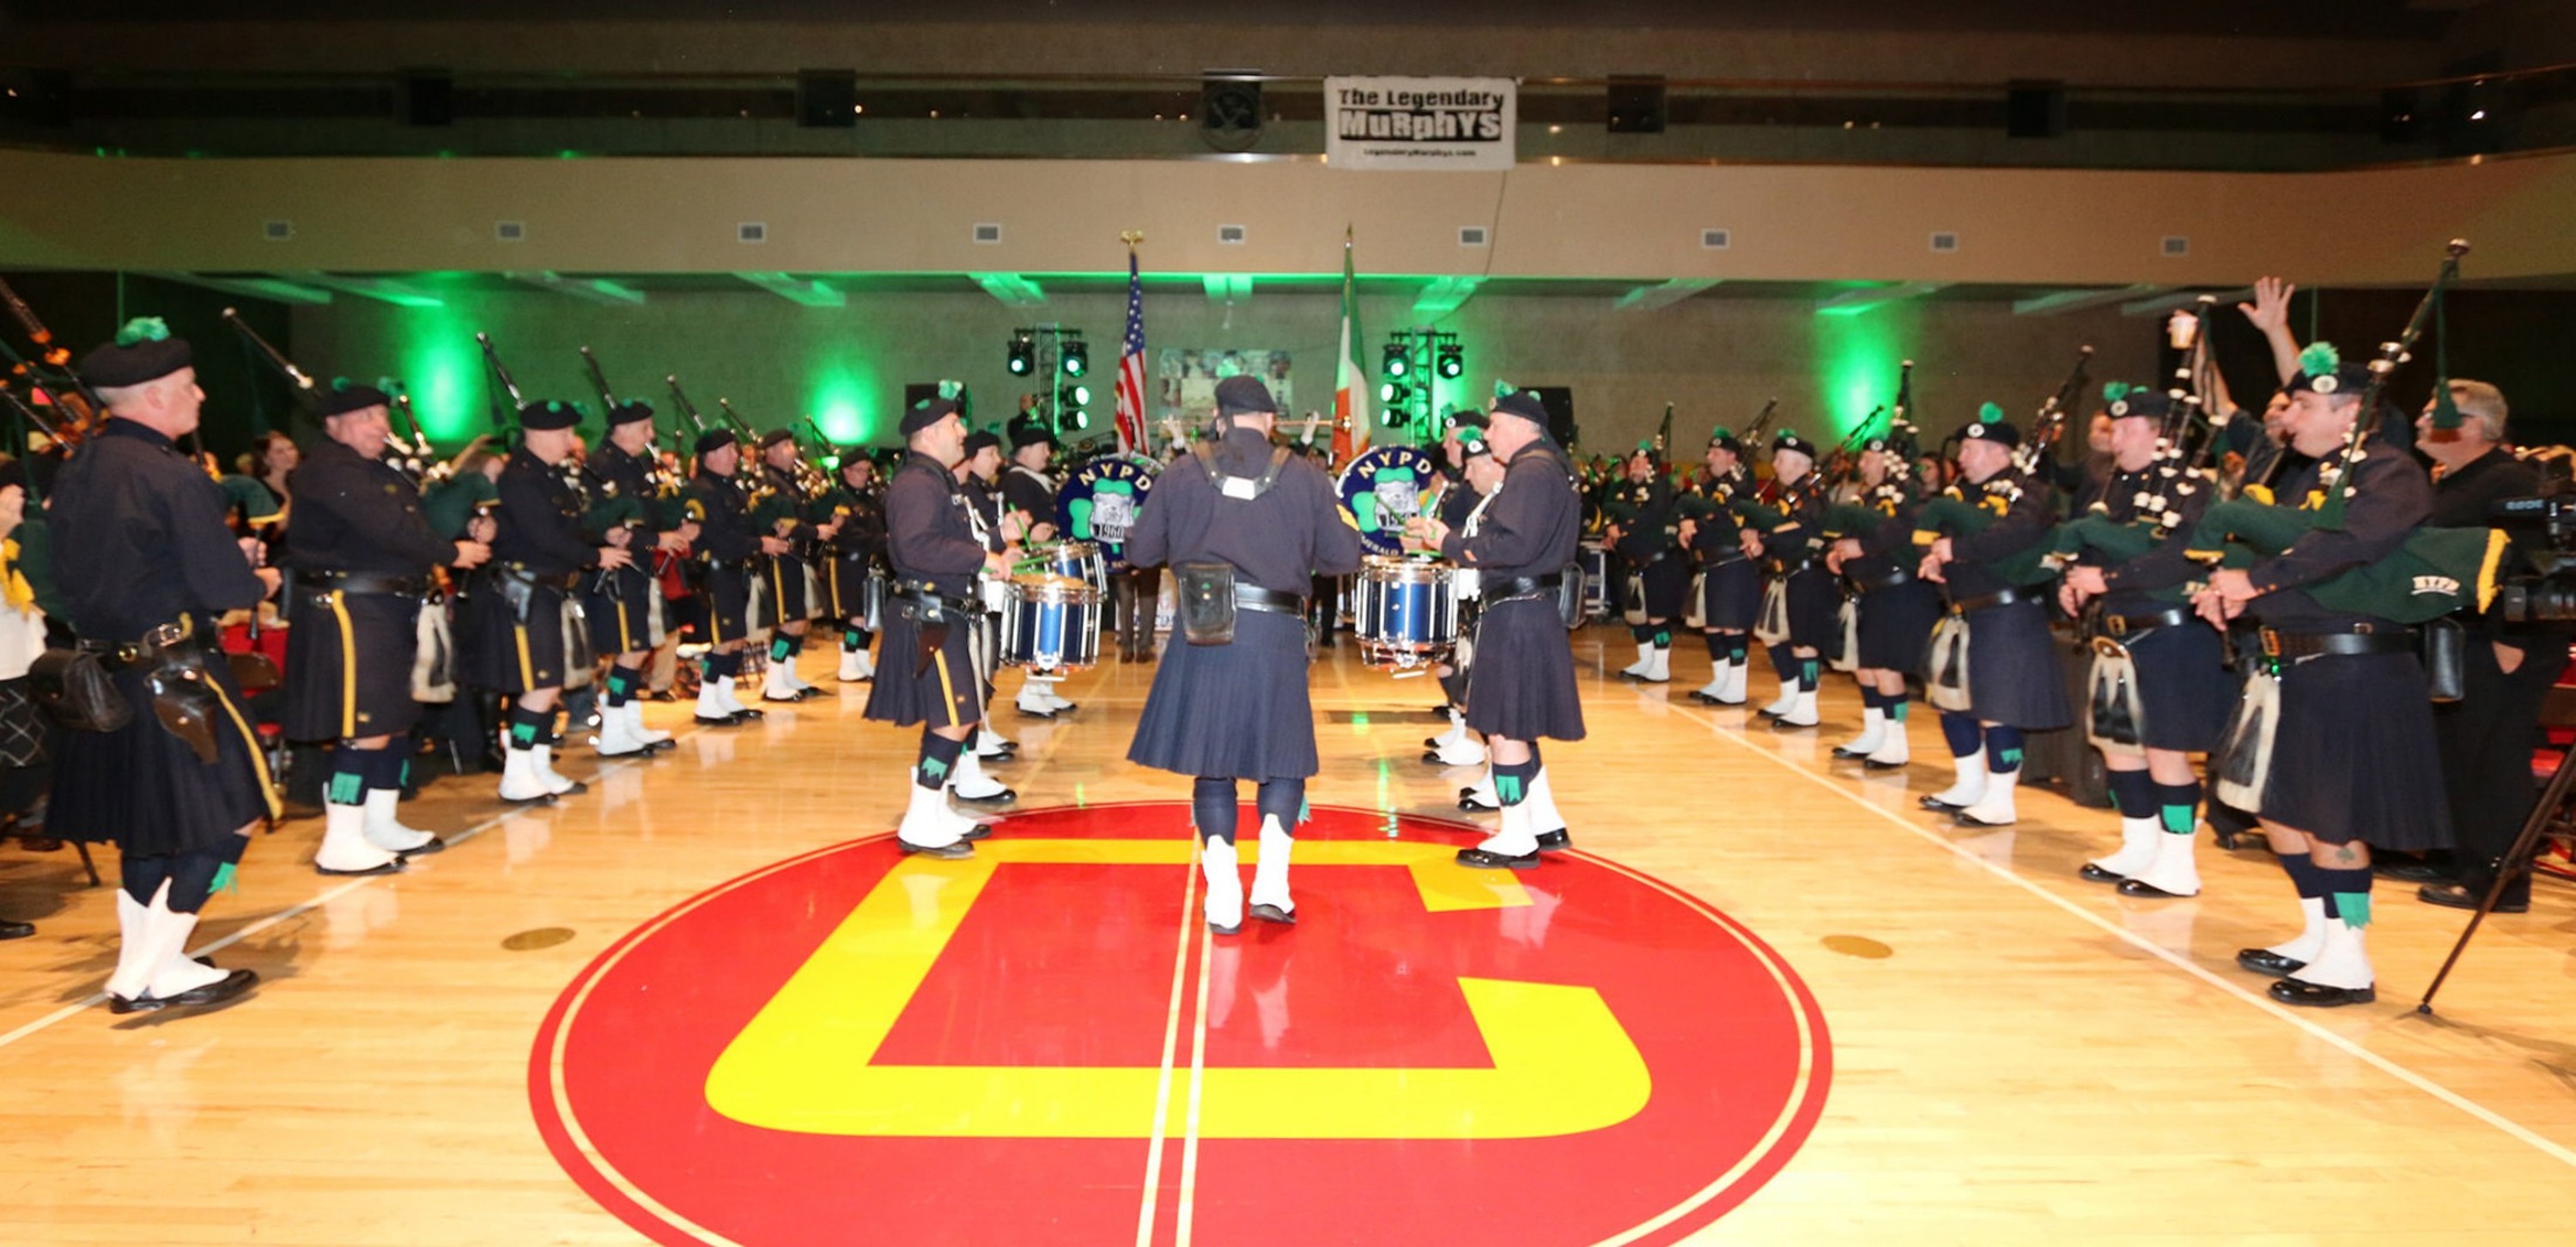 NYPD Emerald Pipes & Drums, Katie McBride Foundation